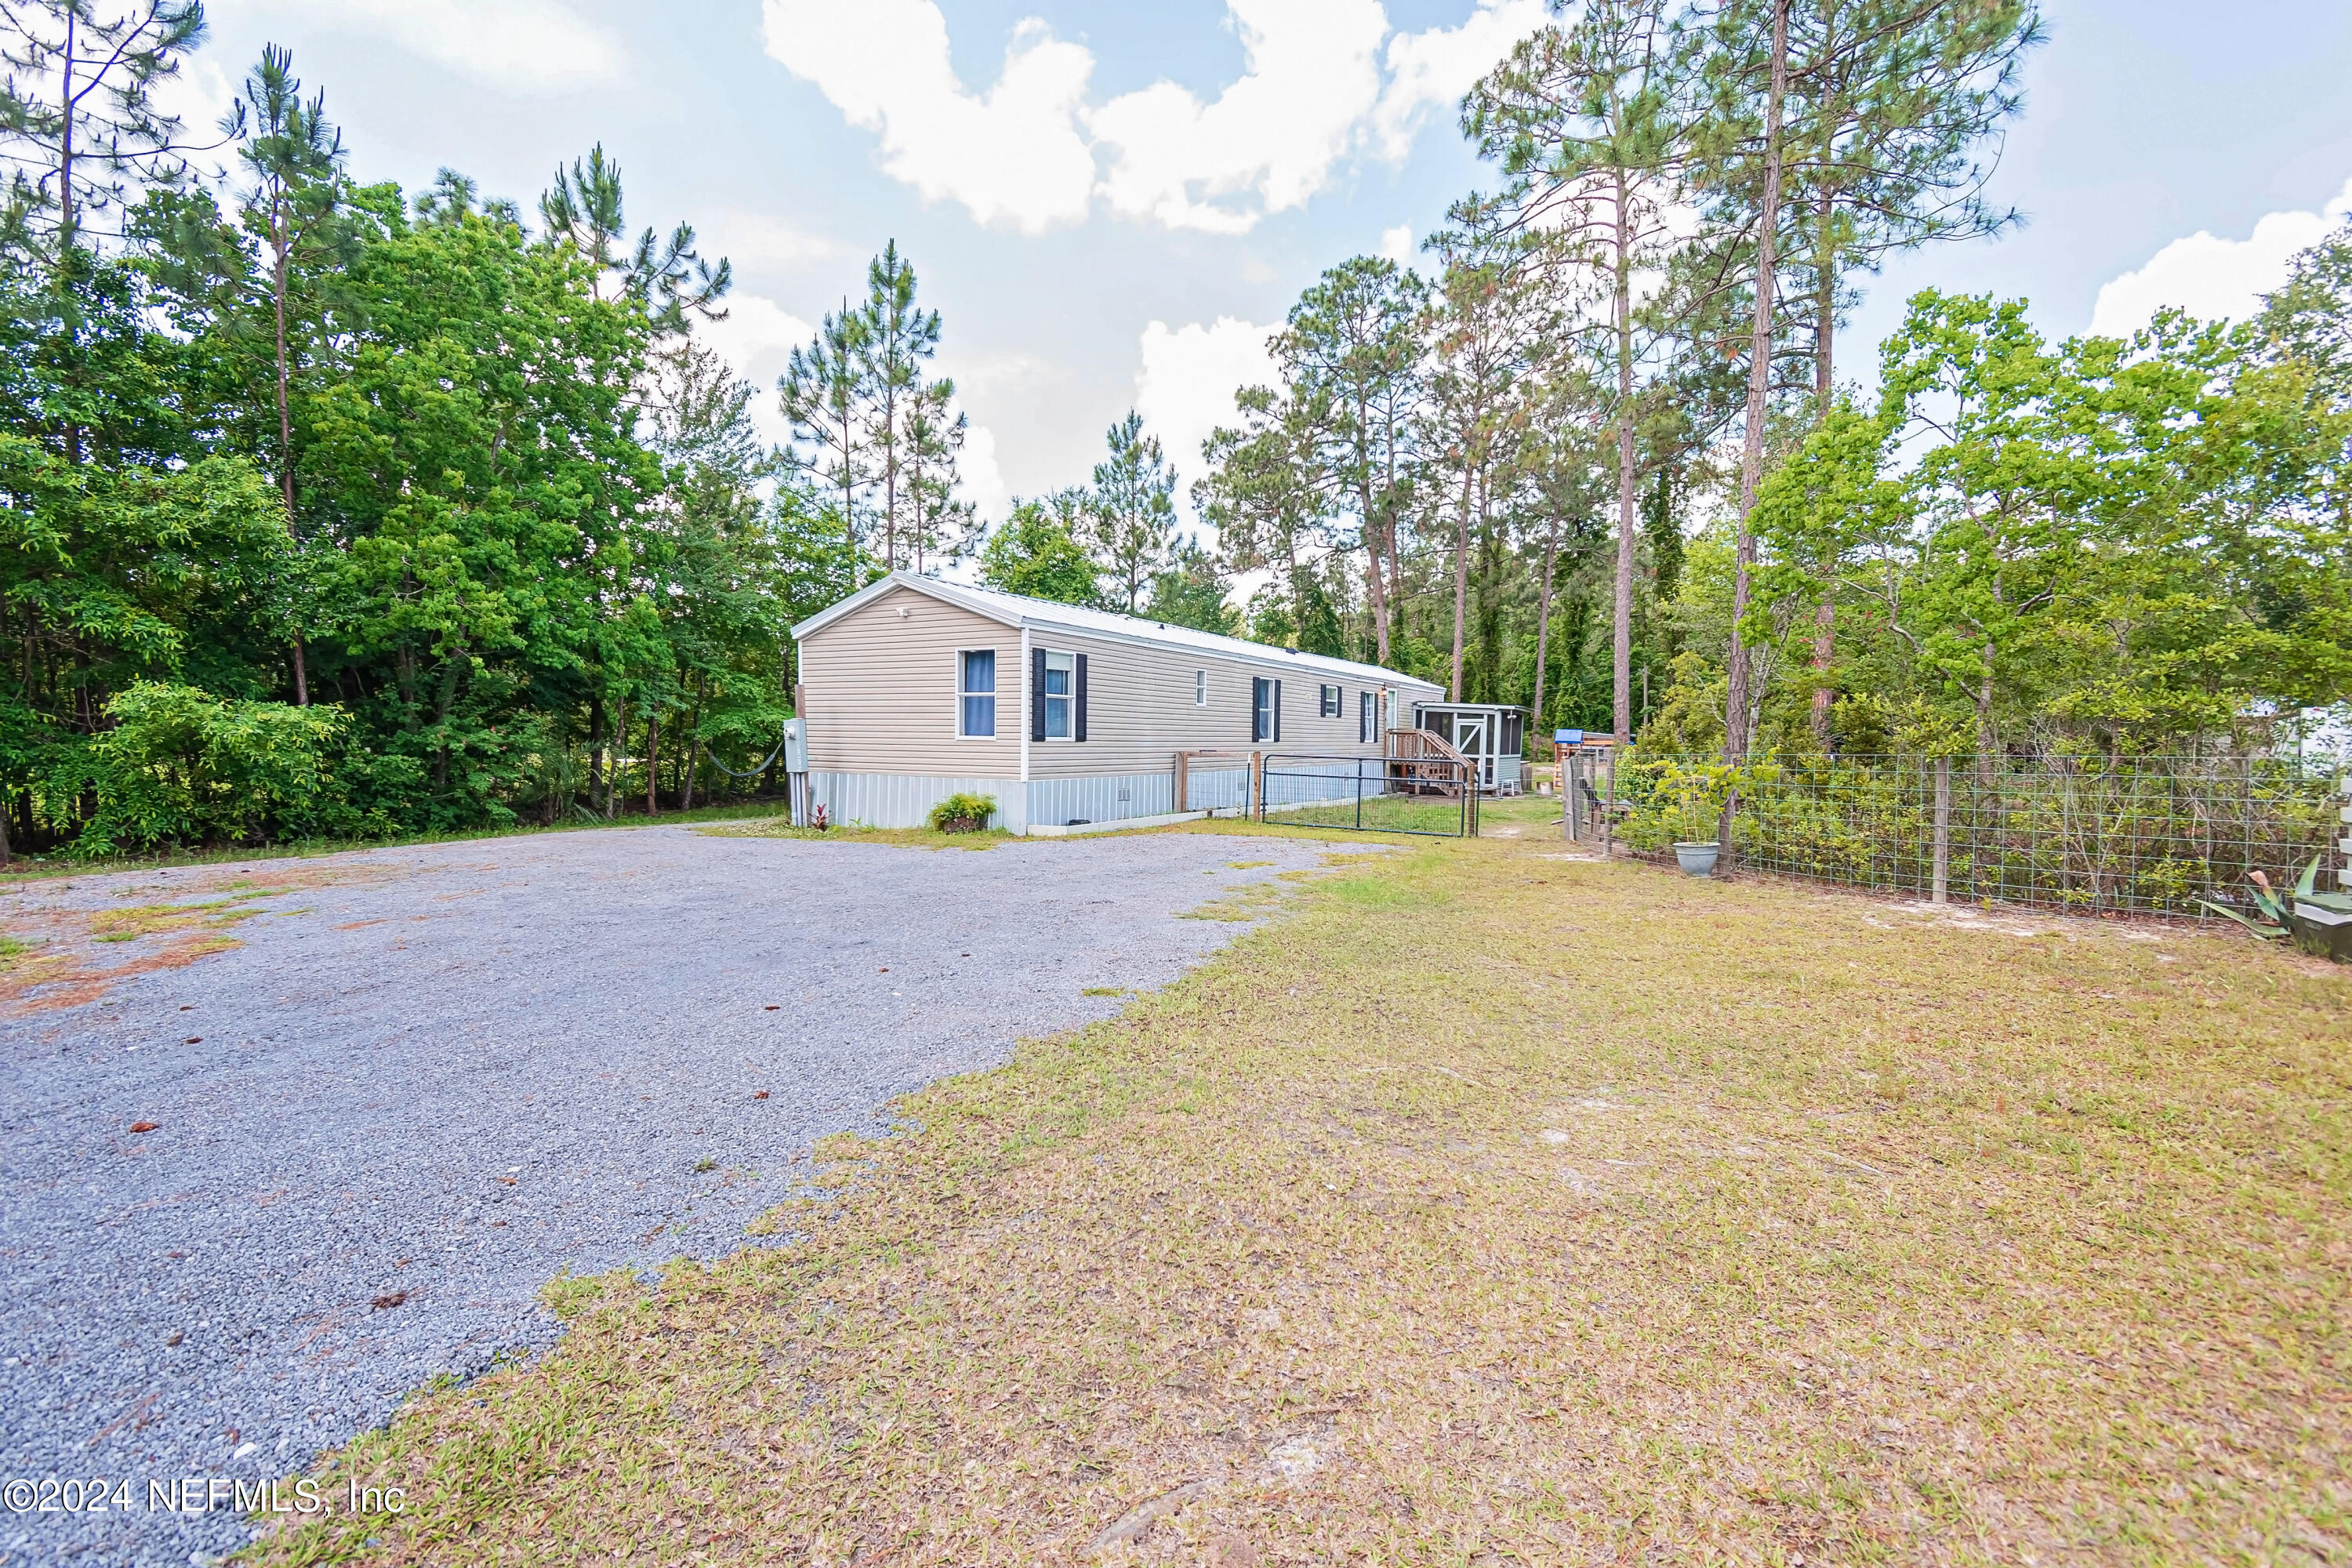 Sanderson, FL home for sale located at 17474 Tommy Road, Sanderson, FL 32087